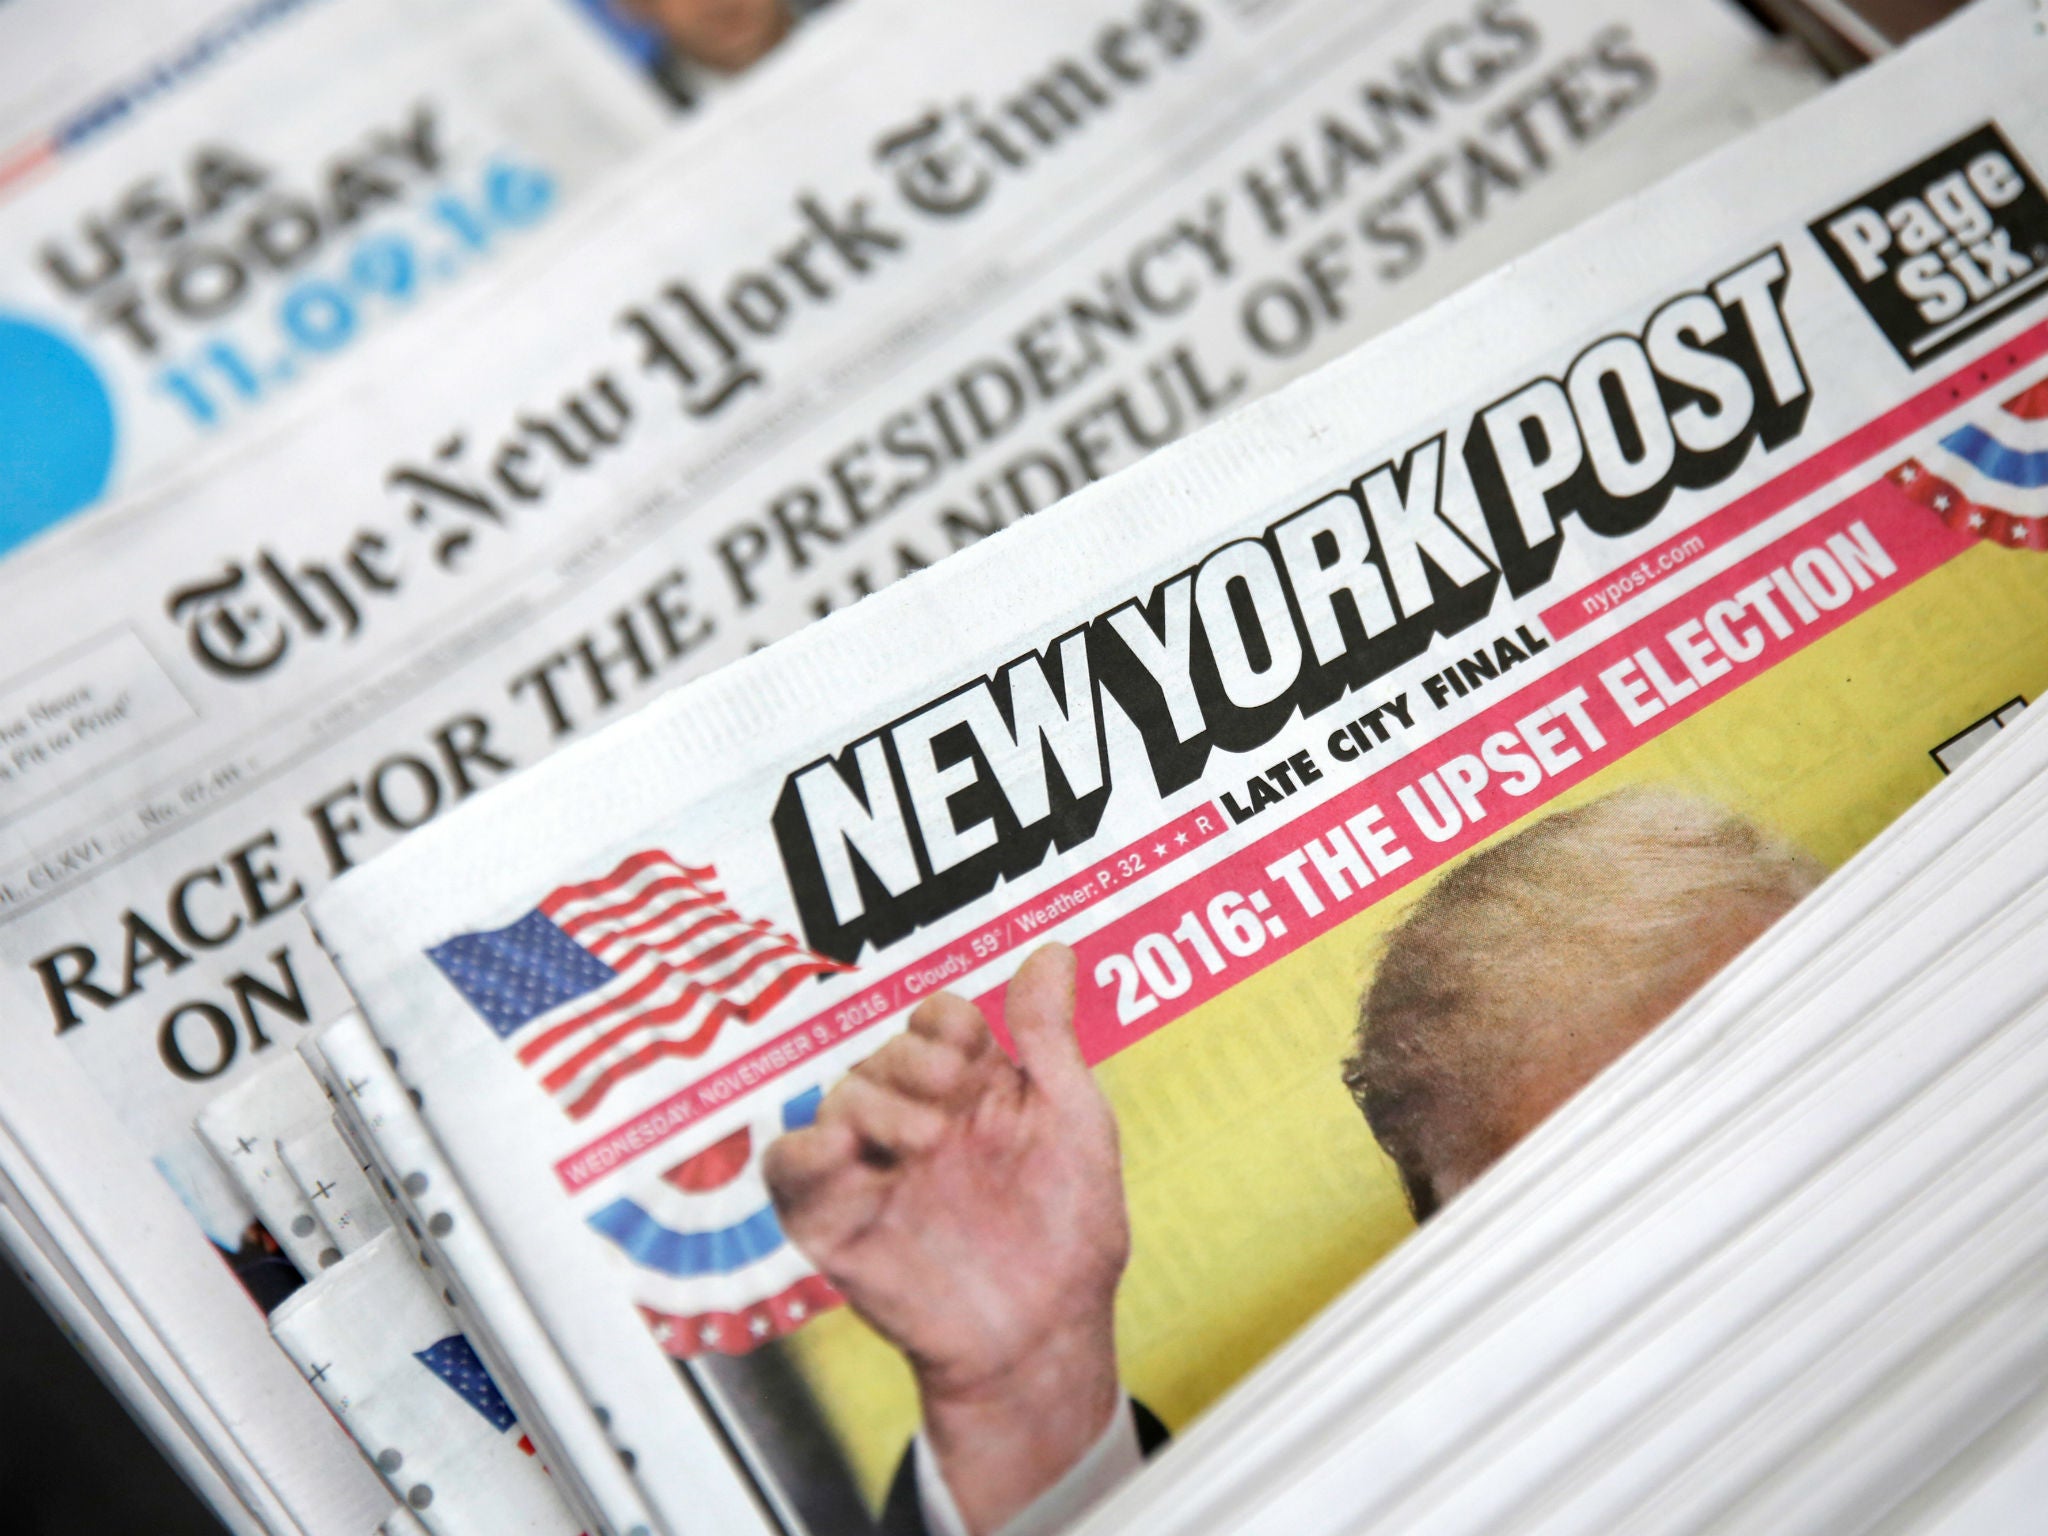 While trust in the media has risen overall, many Americans embrace Donald Trump's view of reporters as the 'enemy'